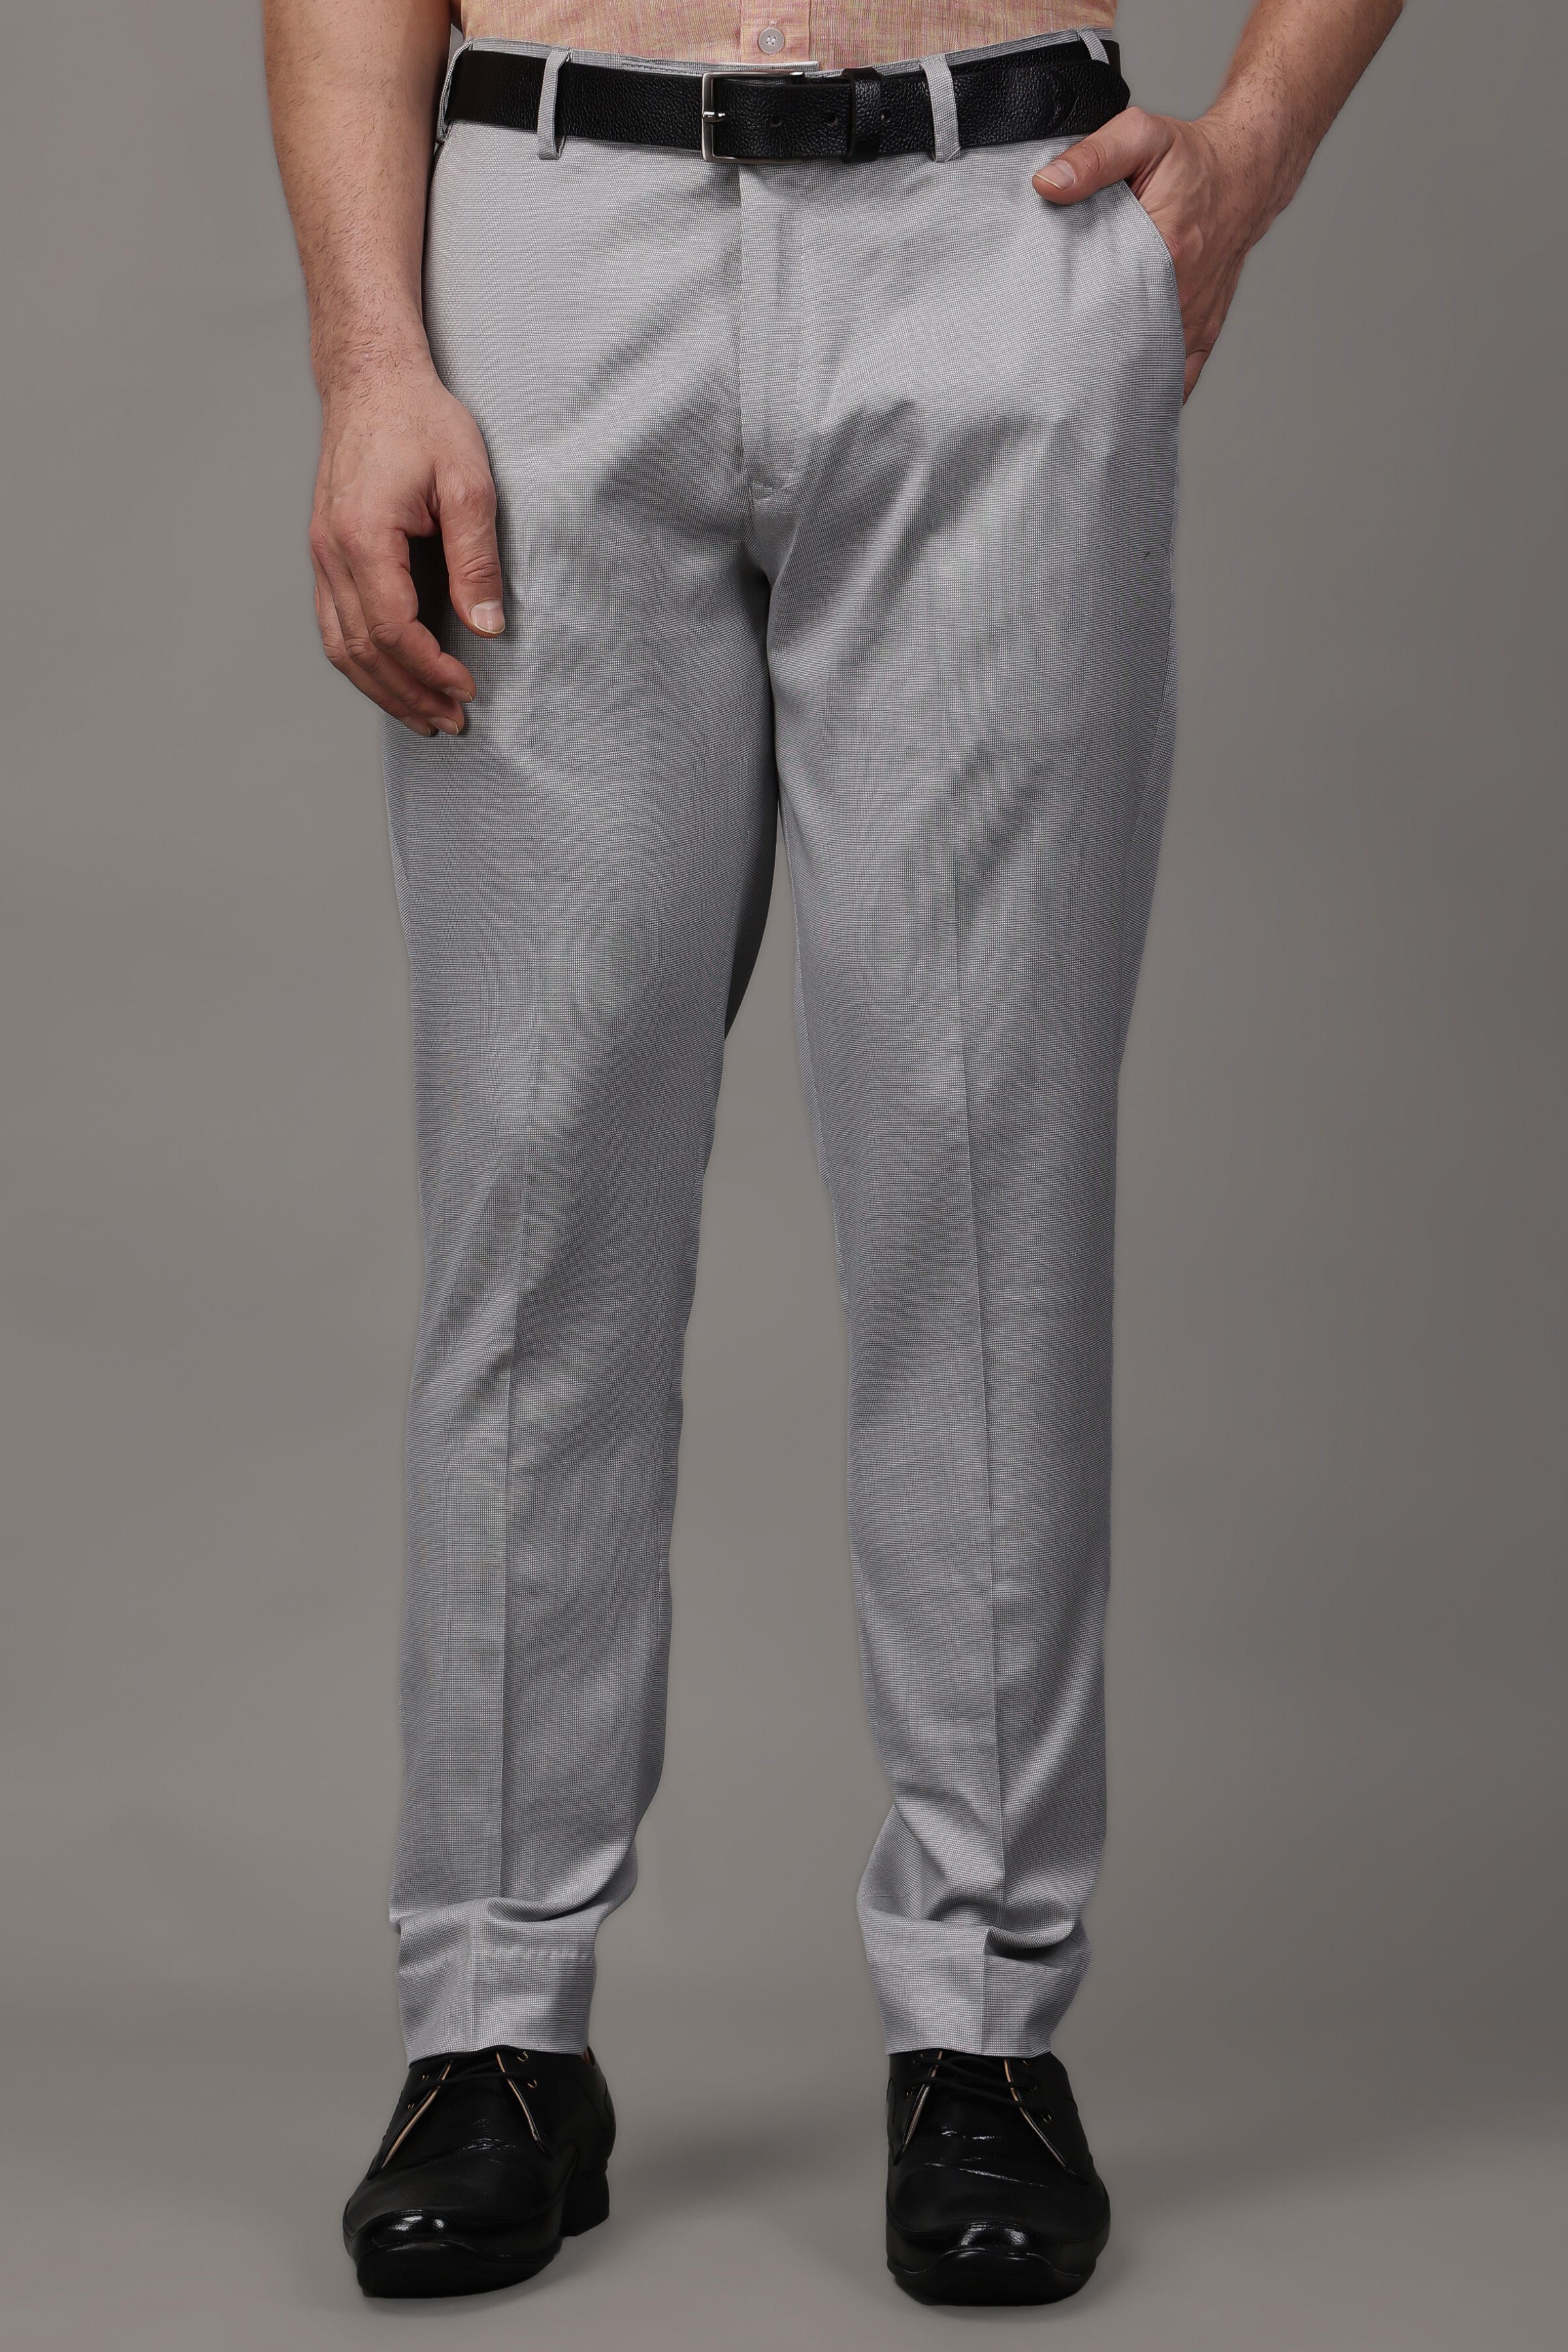 Quick Dry Wholesale Price Mens Solid Plain Grey Colour Formal Cotton Trouser  at Best Price in Hyderabad | Ykk Fashions